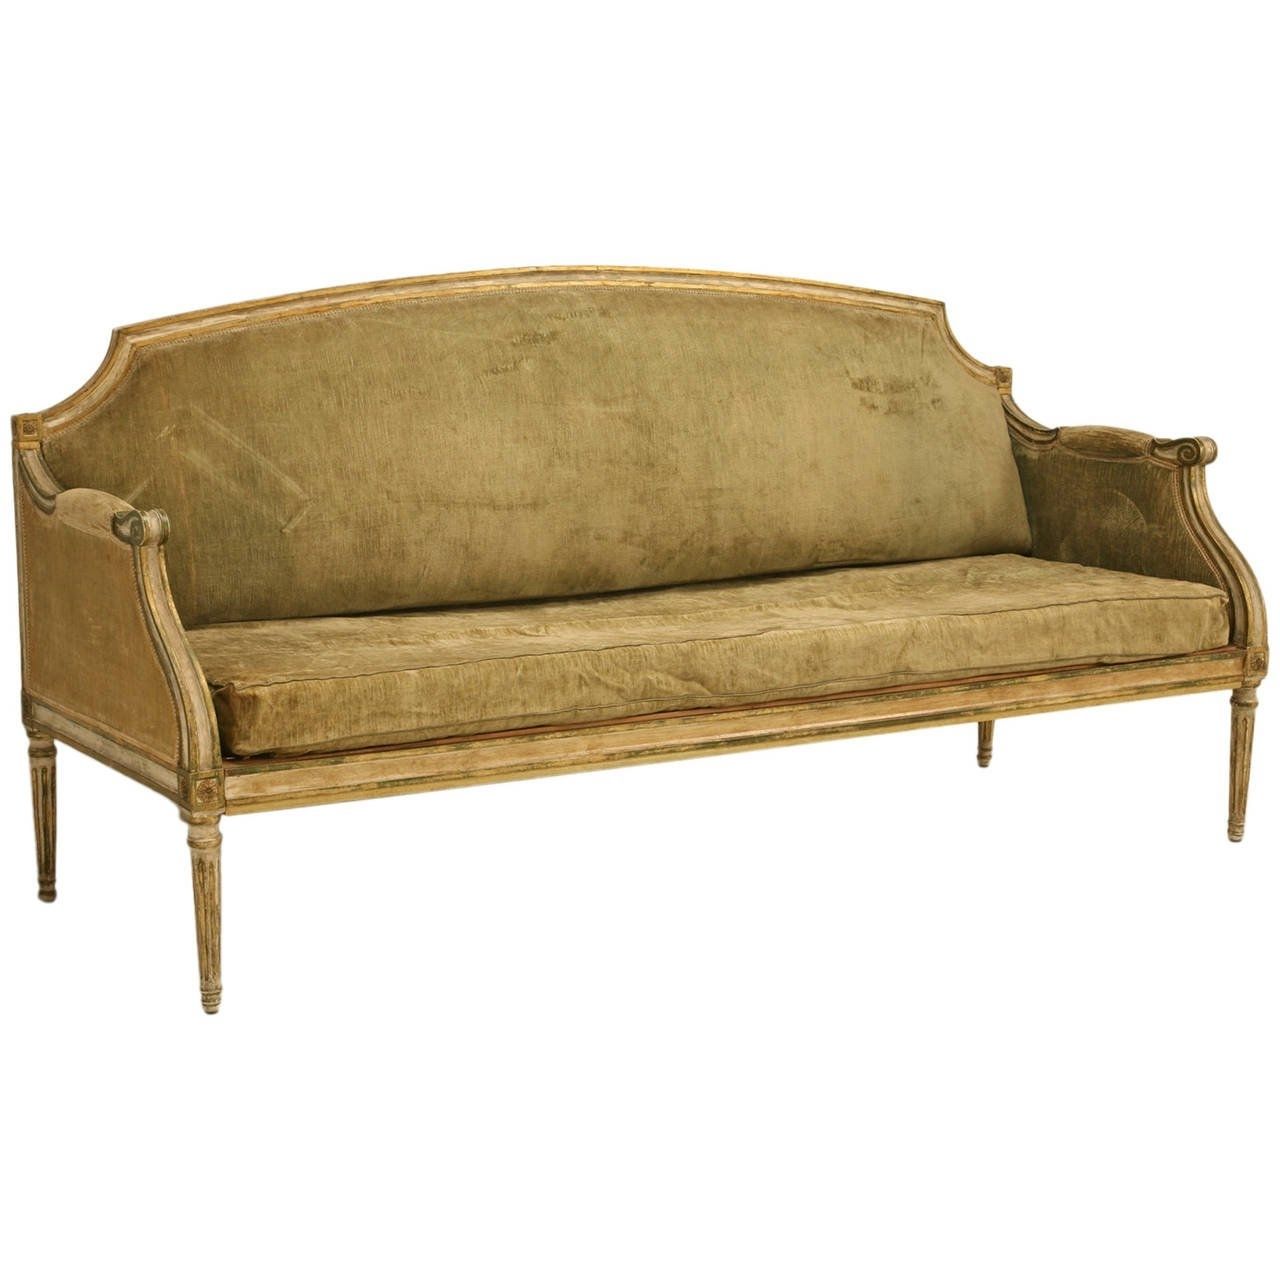 Trendy Xvi Style Antique Sofa In Incredible Original Paint At 1Stdibs Throughout Antique Sofas (View 3 of 15)